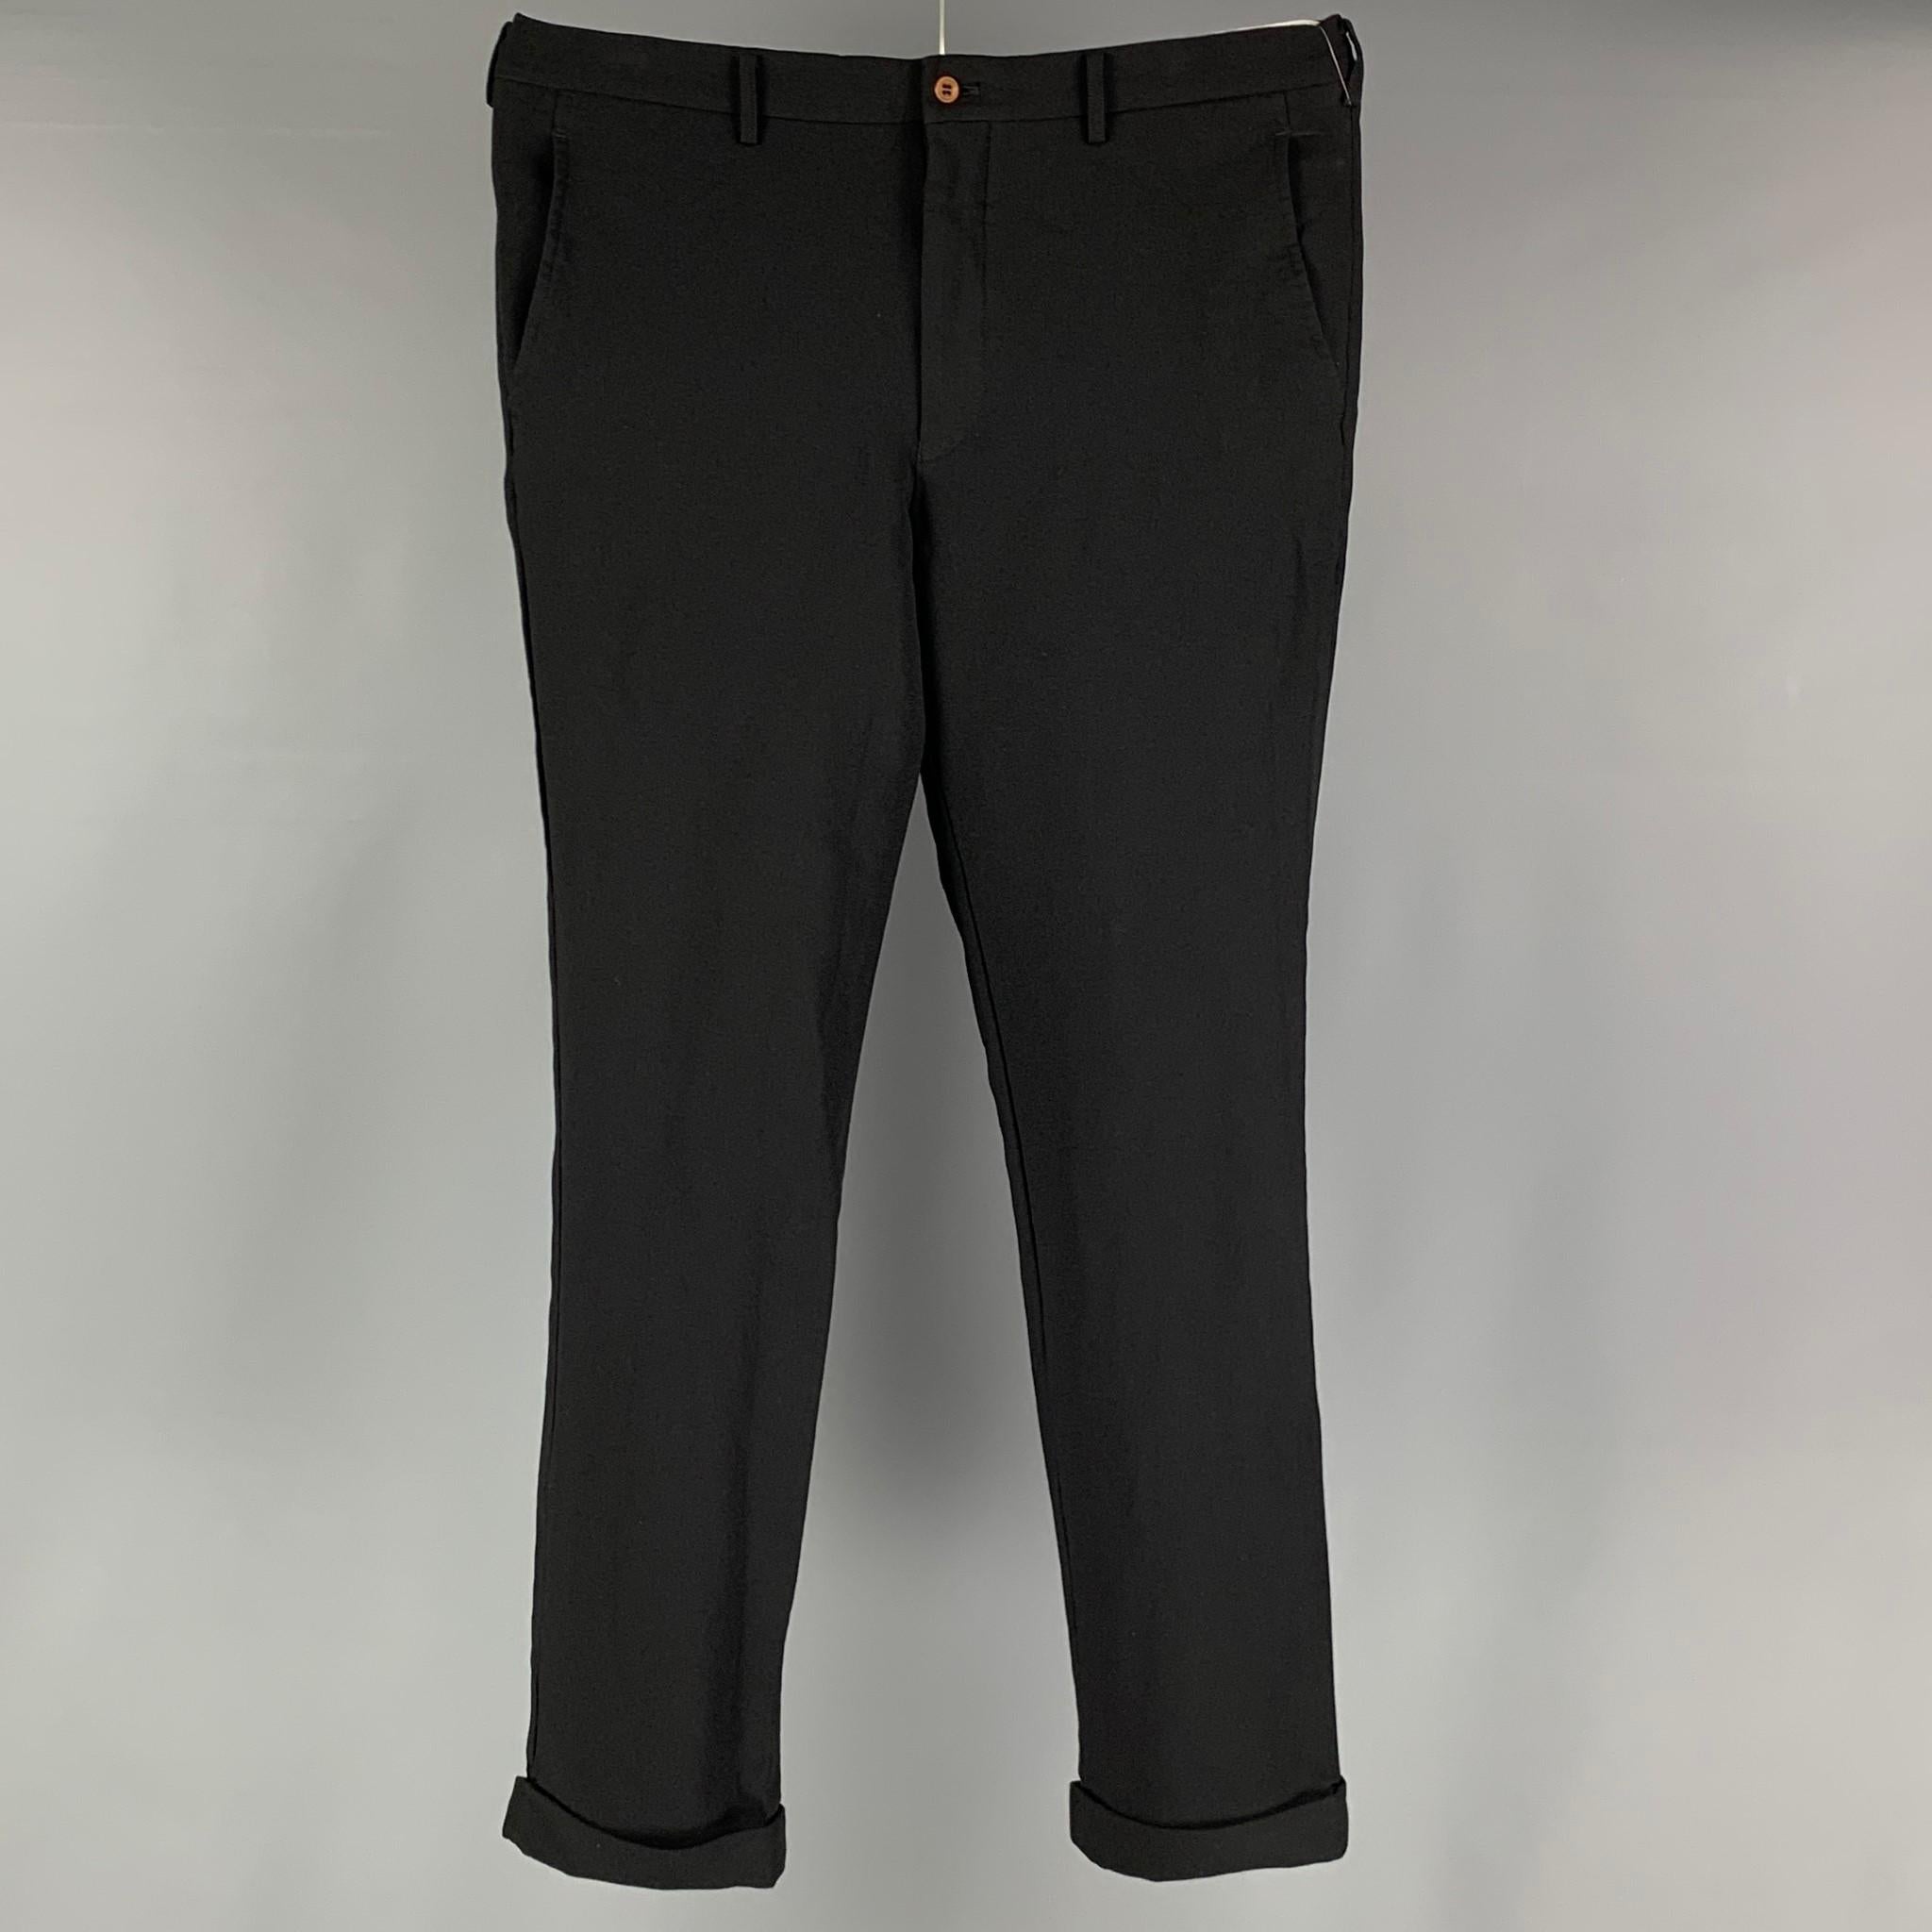 COMME des GARCONS HOMME PLUS dress pants comes in a black polyester twill material featuring a flat front, front & back pockets, and a zip fly closure. Made in Japan.

Very Good Pre-Owned Condition.
Marked: XL / AD2015

Measurements:

Waist: 36